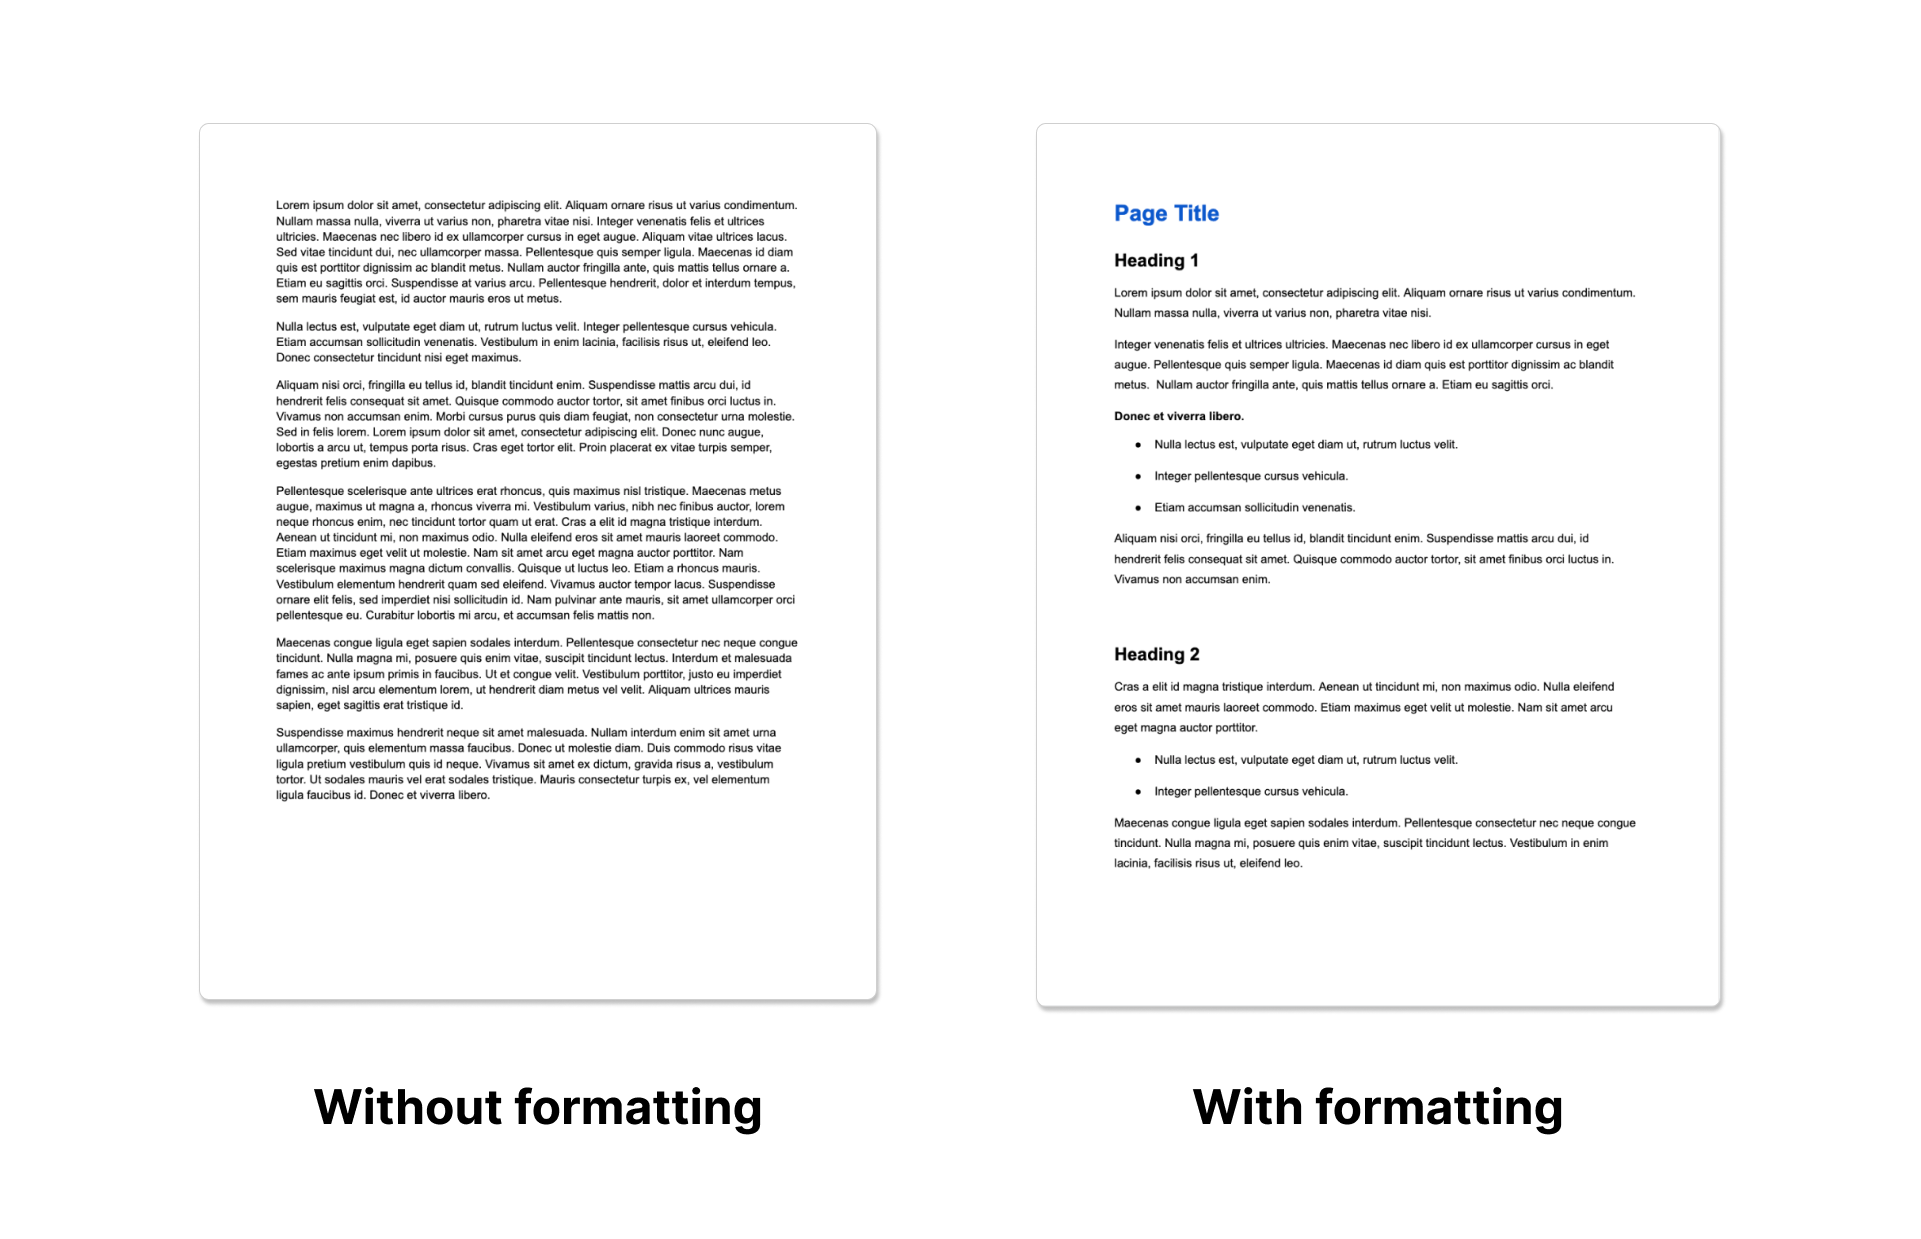 Comparison of texts with and without formatting